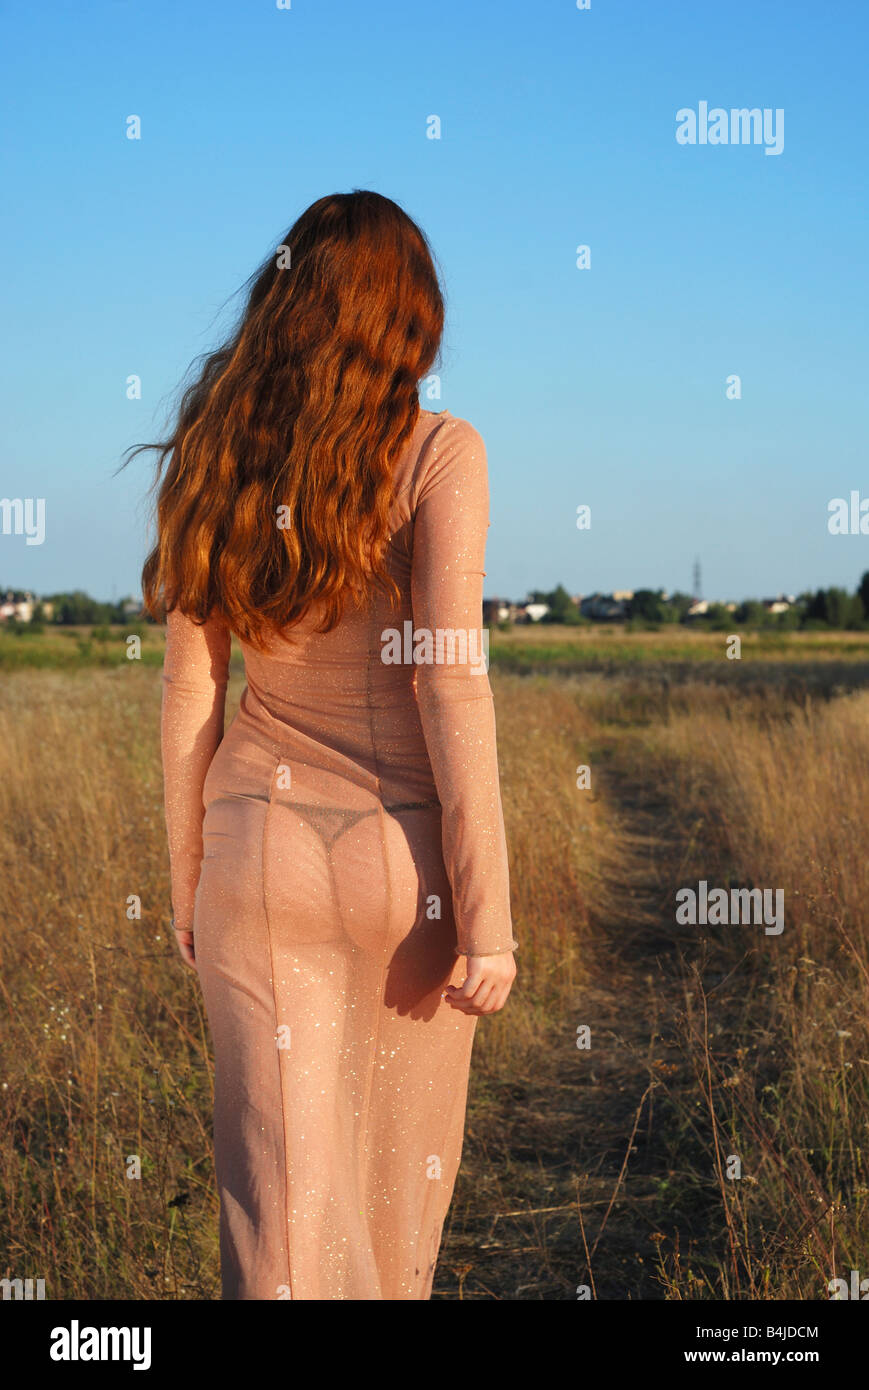 Long-haired girl going on path in transparent flesh-colored dress against blue sky and meadow dried, warm tint of summer sunset Stock Photo